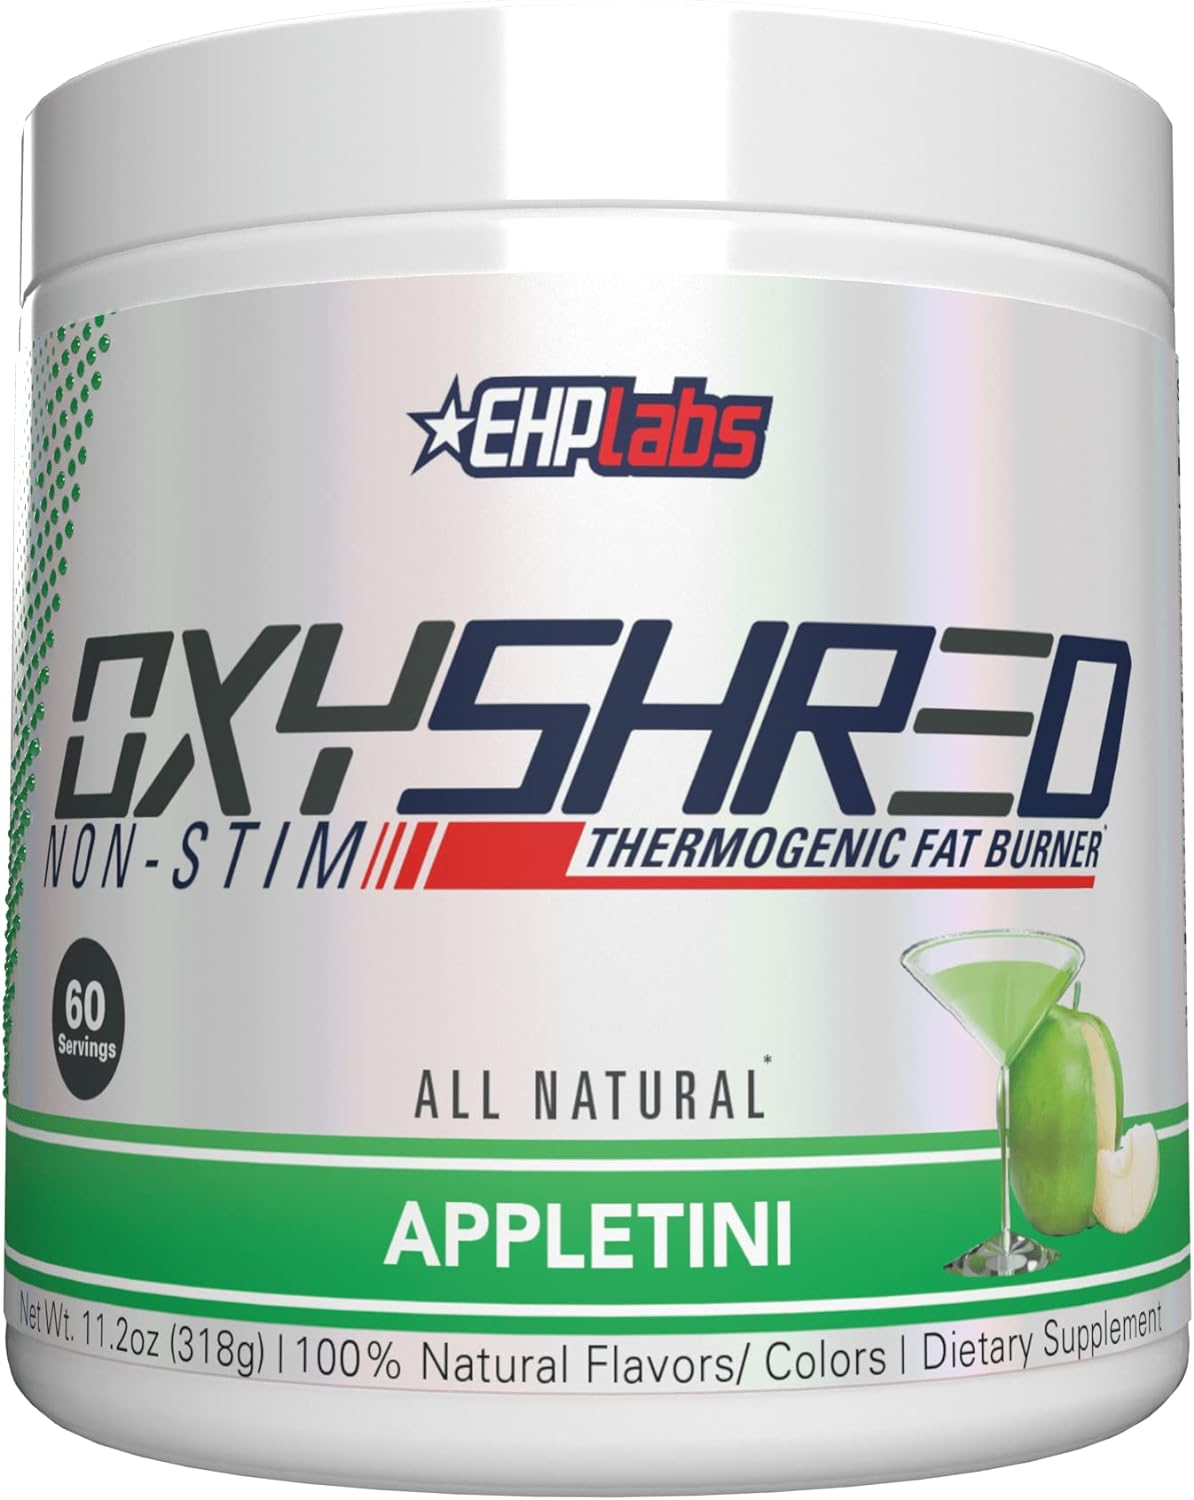 EHPlabs OxyShred Non Stimulant Thermogenic Pre Workout Powder  Shredding Supplement - Pre Workout Powder with L Glutamine  Acetyl L Carnitine, Energy Boost Drink - Appletini, 60 Servings